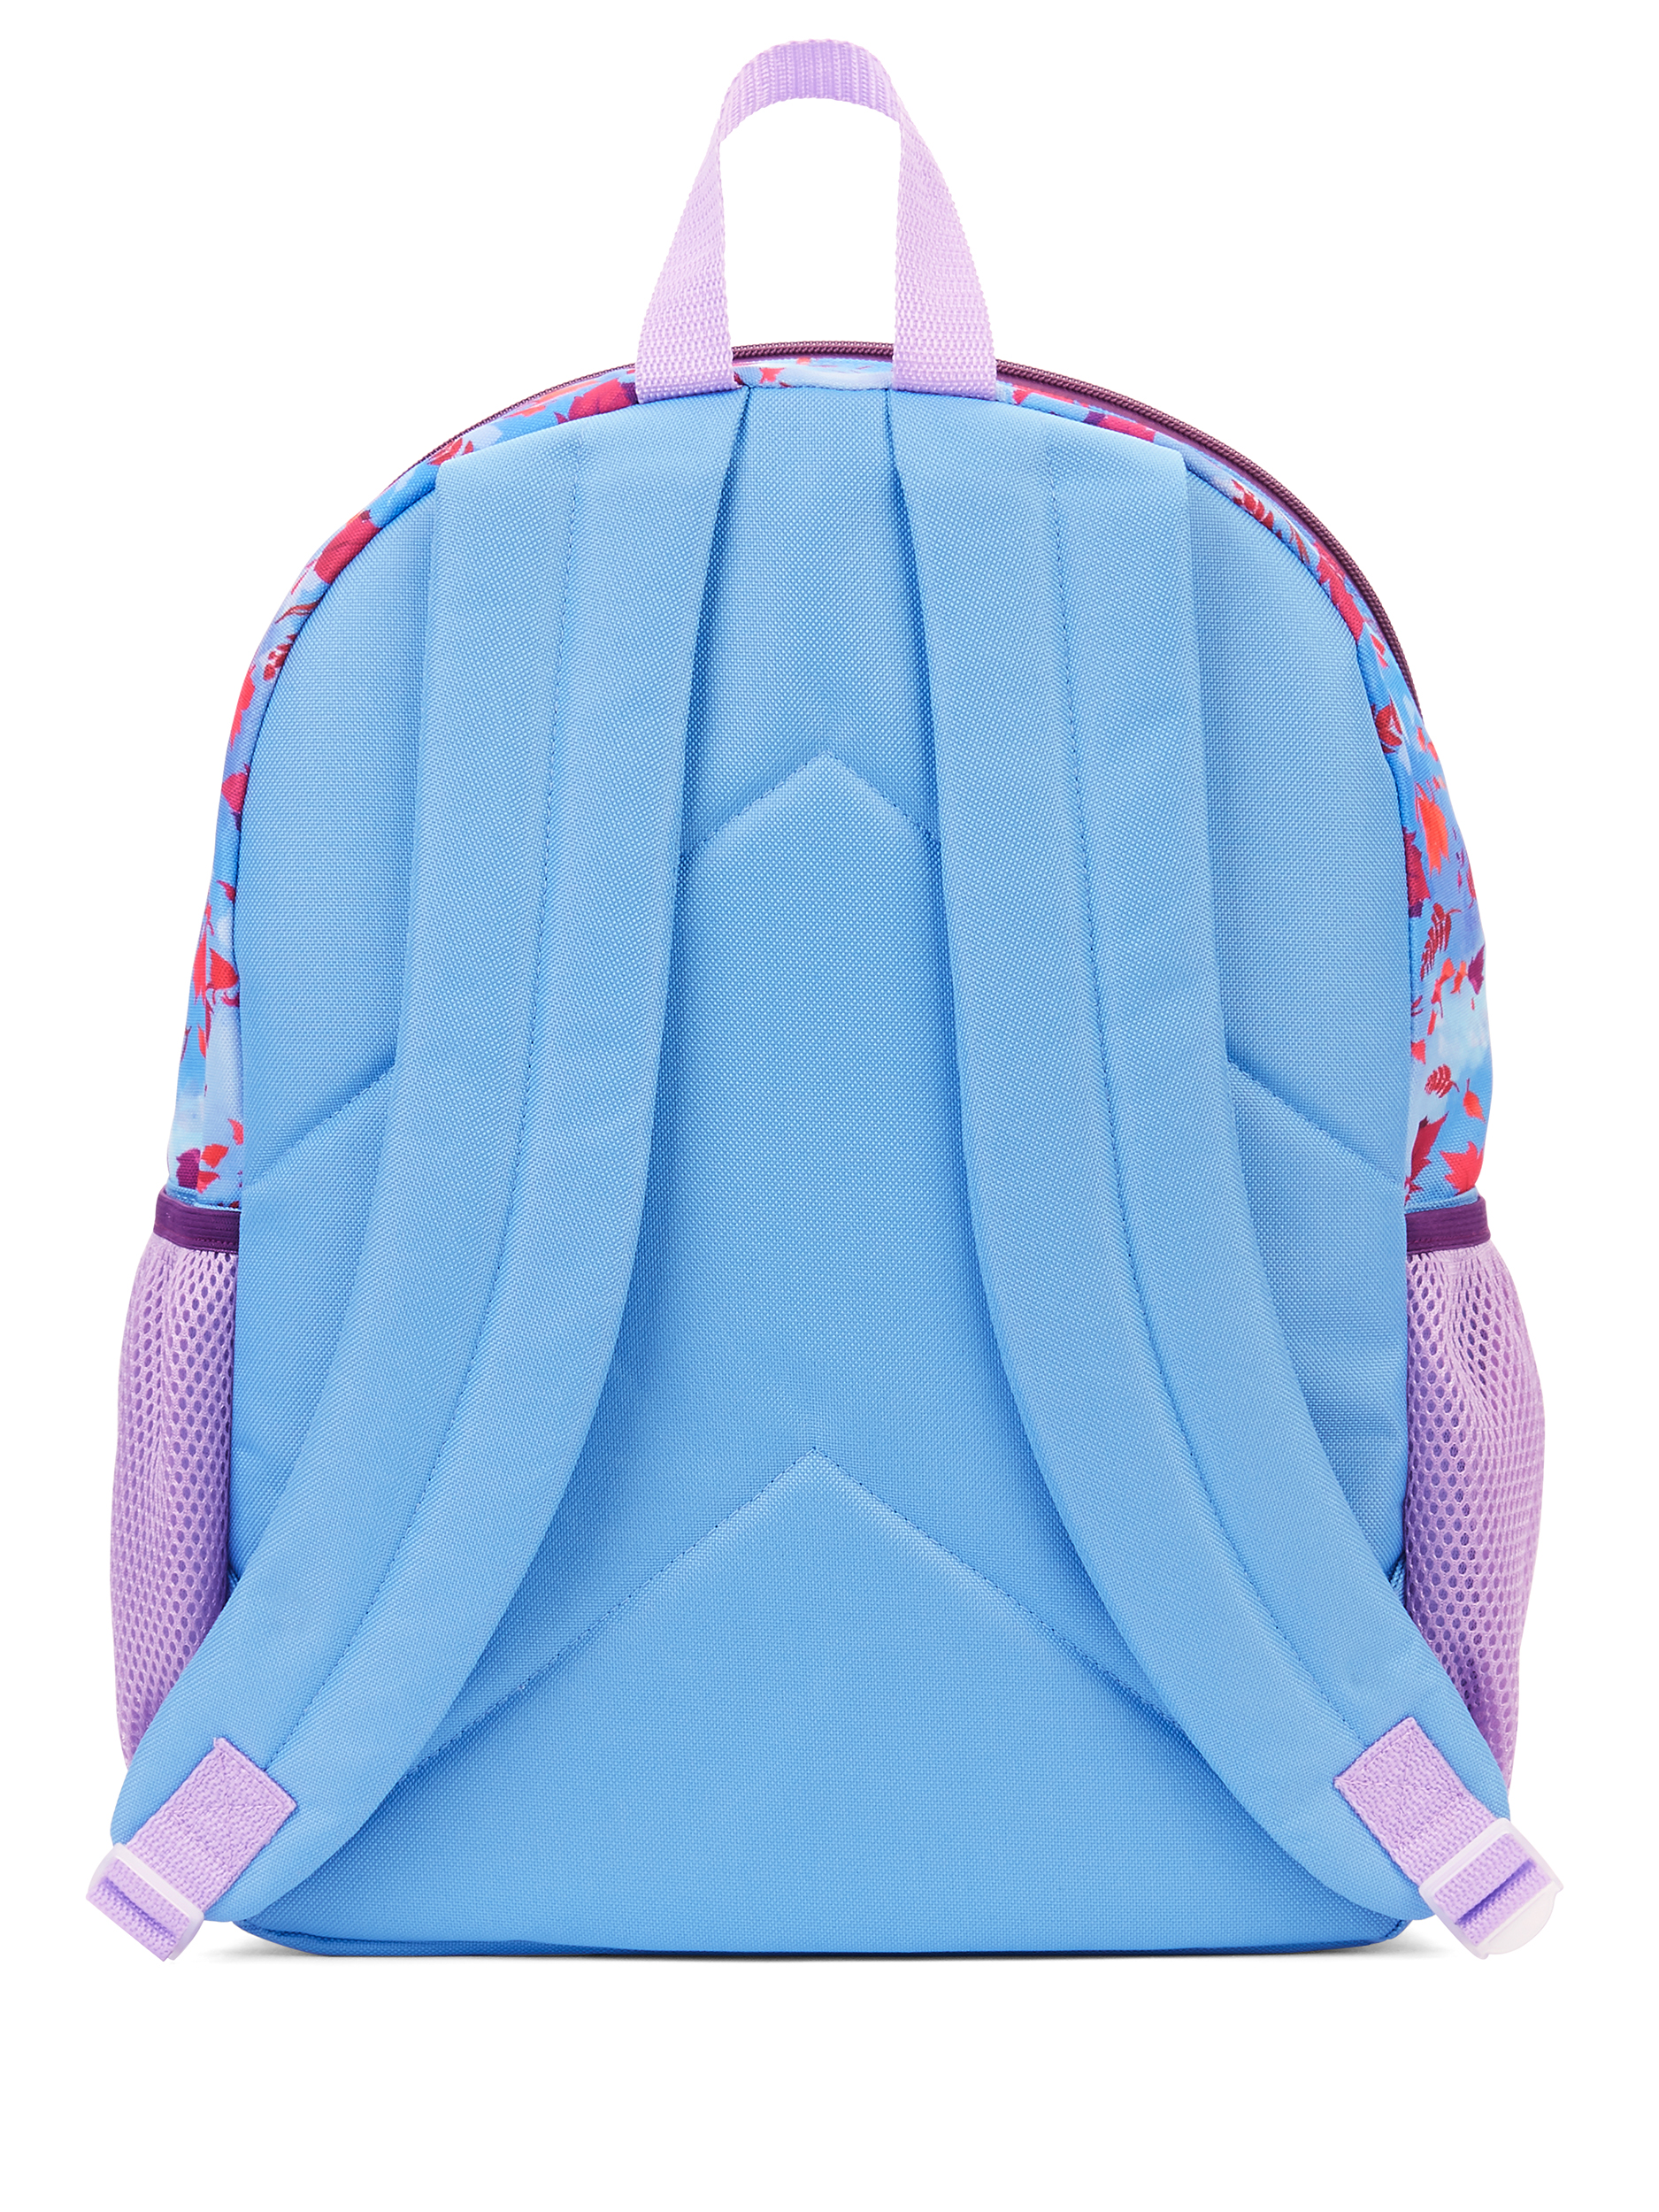 Disney Frozen 2 Elsa And Anna Girls' Purple Blue Backpack with Lunch Bag - image 3 of 3